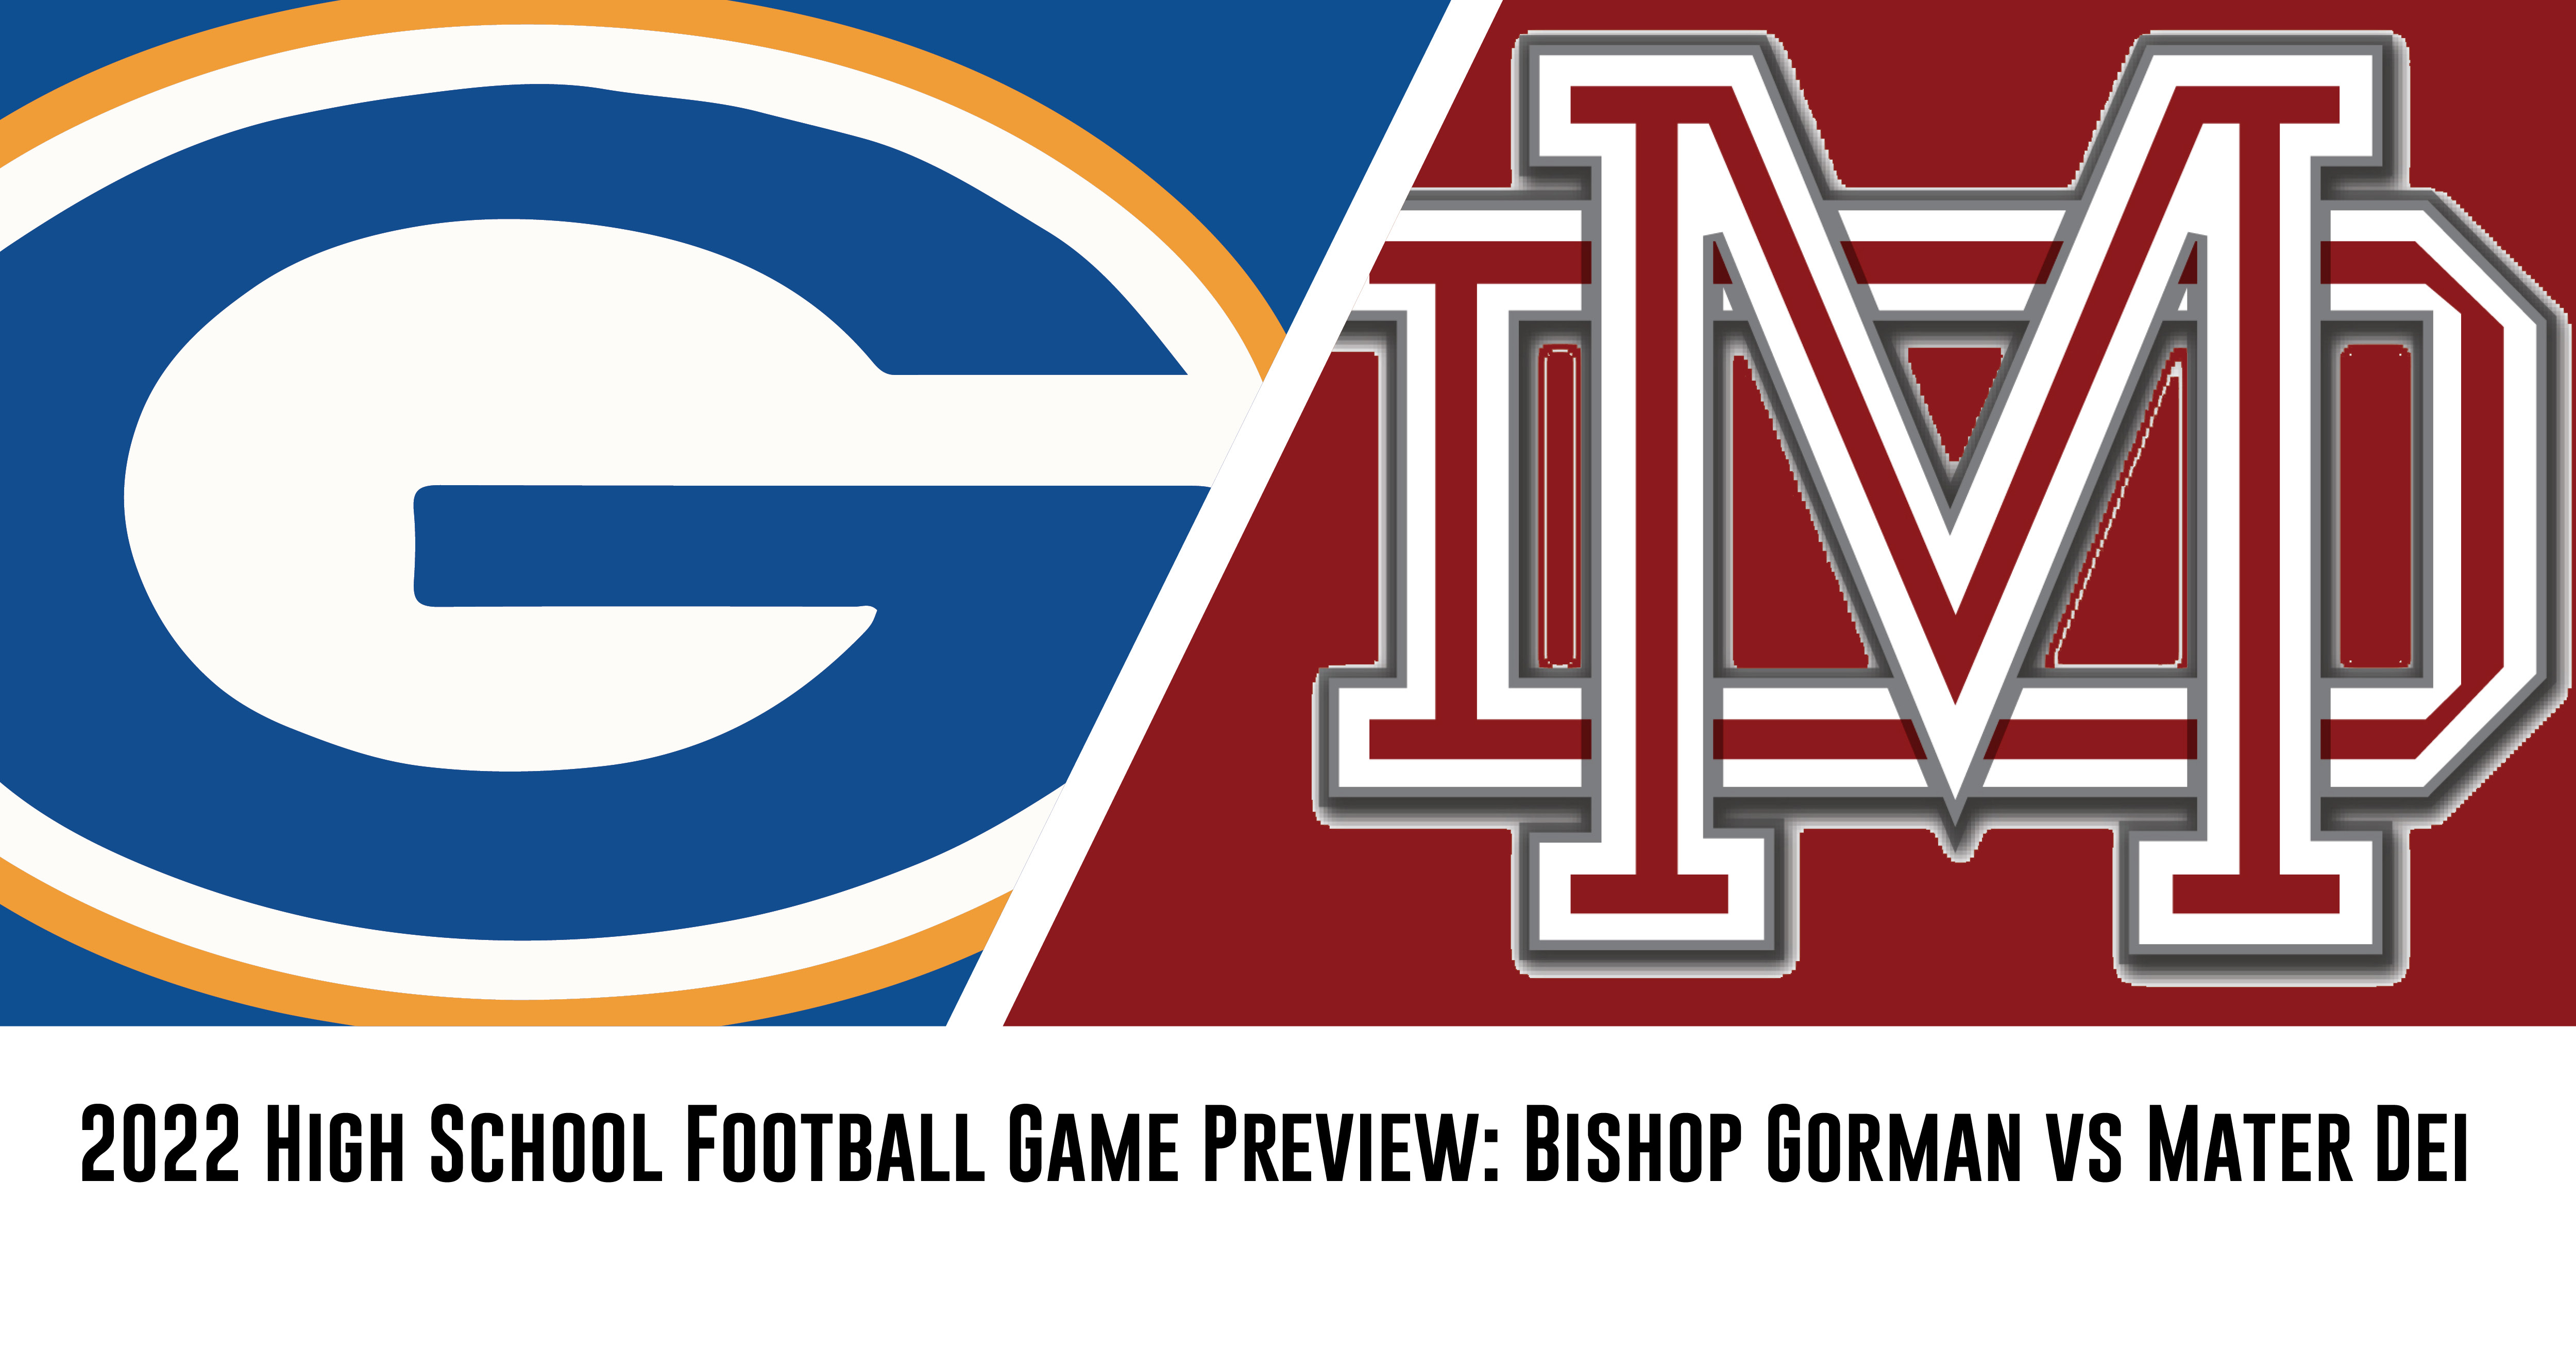 National Game of the Week Gorman vs. Mater Dei ITG Next